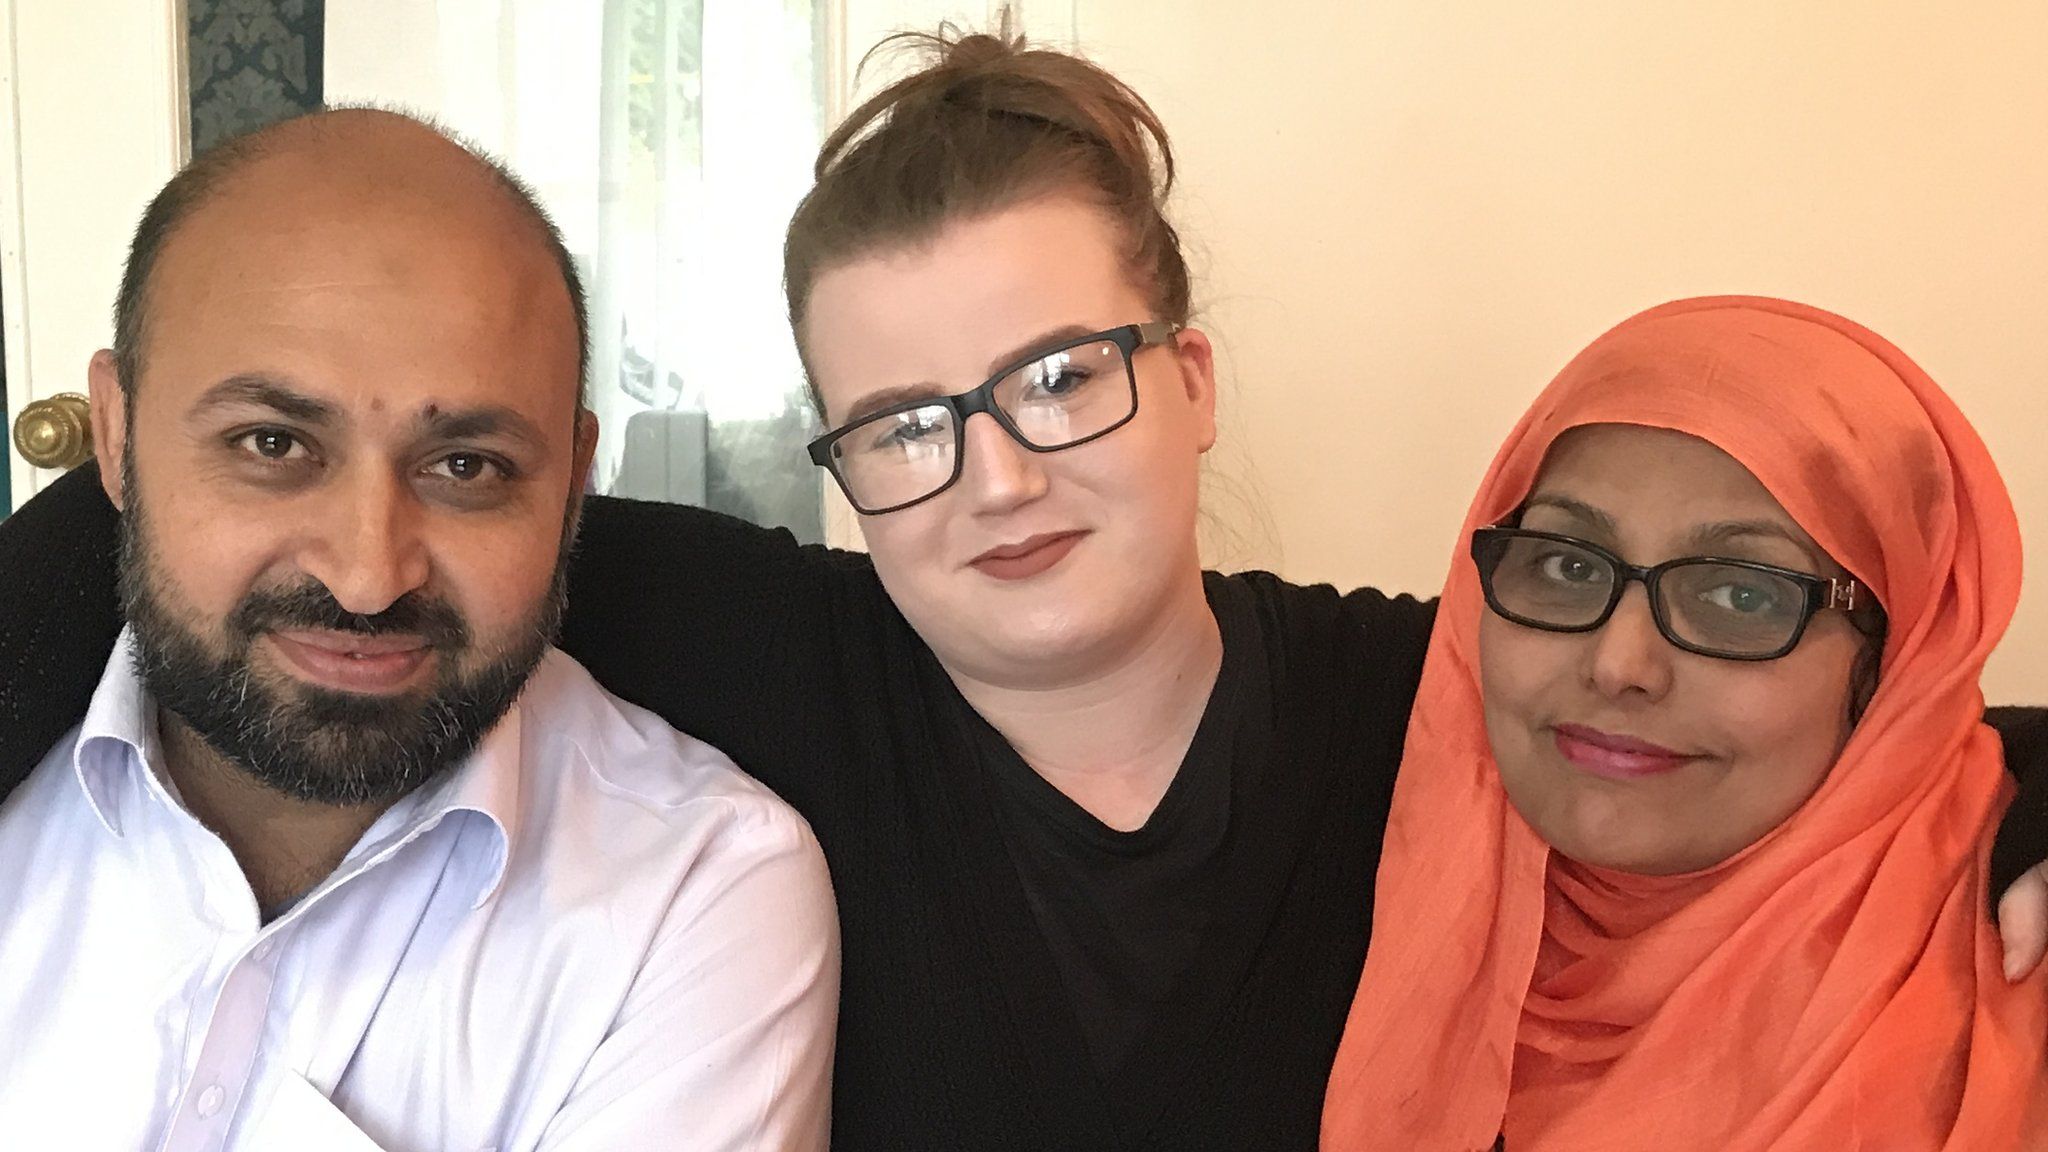 Rebecca and her foster parents Muhammad and Shanaz Arshad